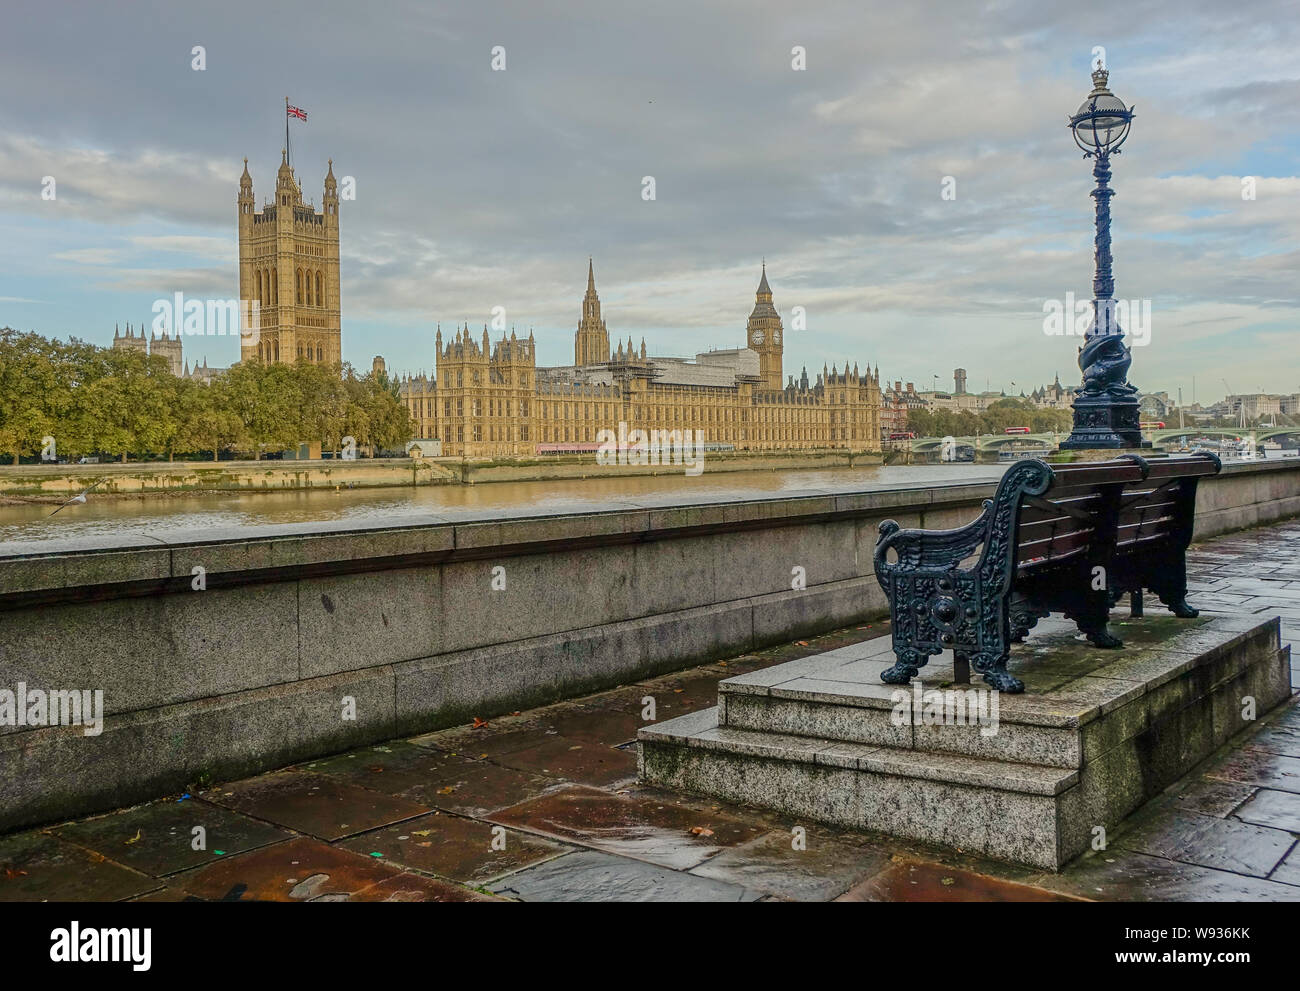 Westminster, London, United Kingdom - October 17, 2016: View of Big Ben and Houses of Parliament from the opposite bank of the Tamesis, with a bench a Stock Photo